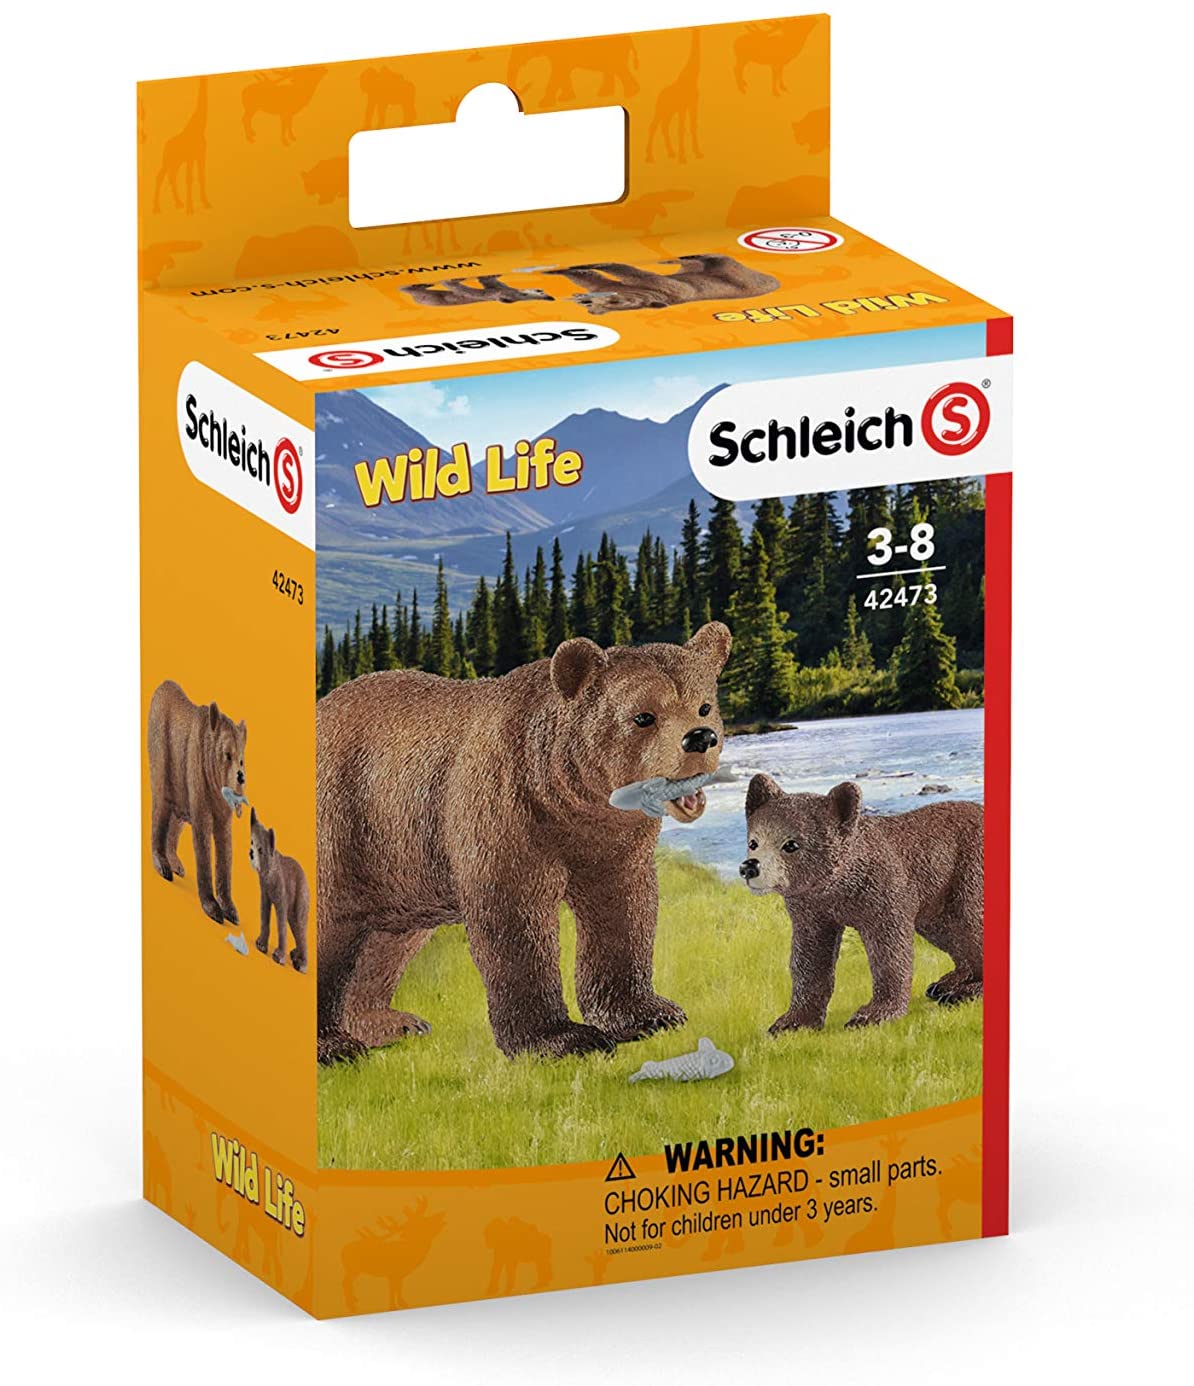 Grizzly Bear Mother and Cub Figure Set